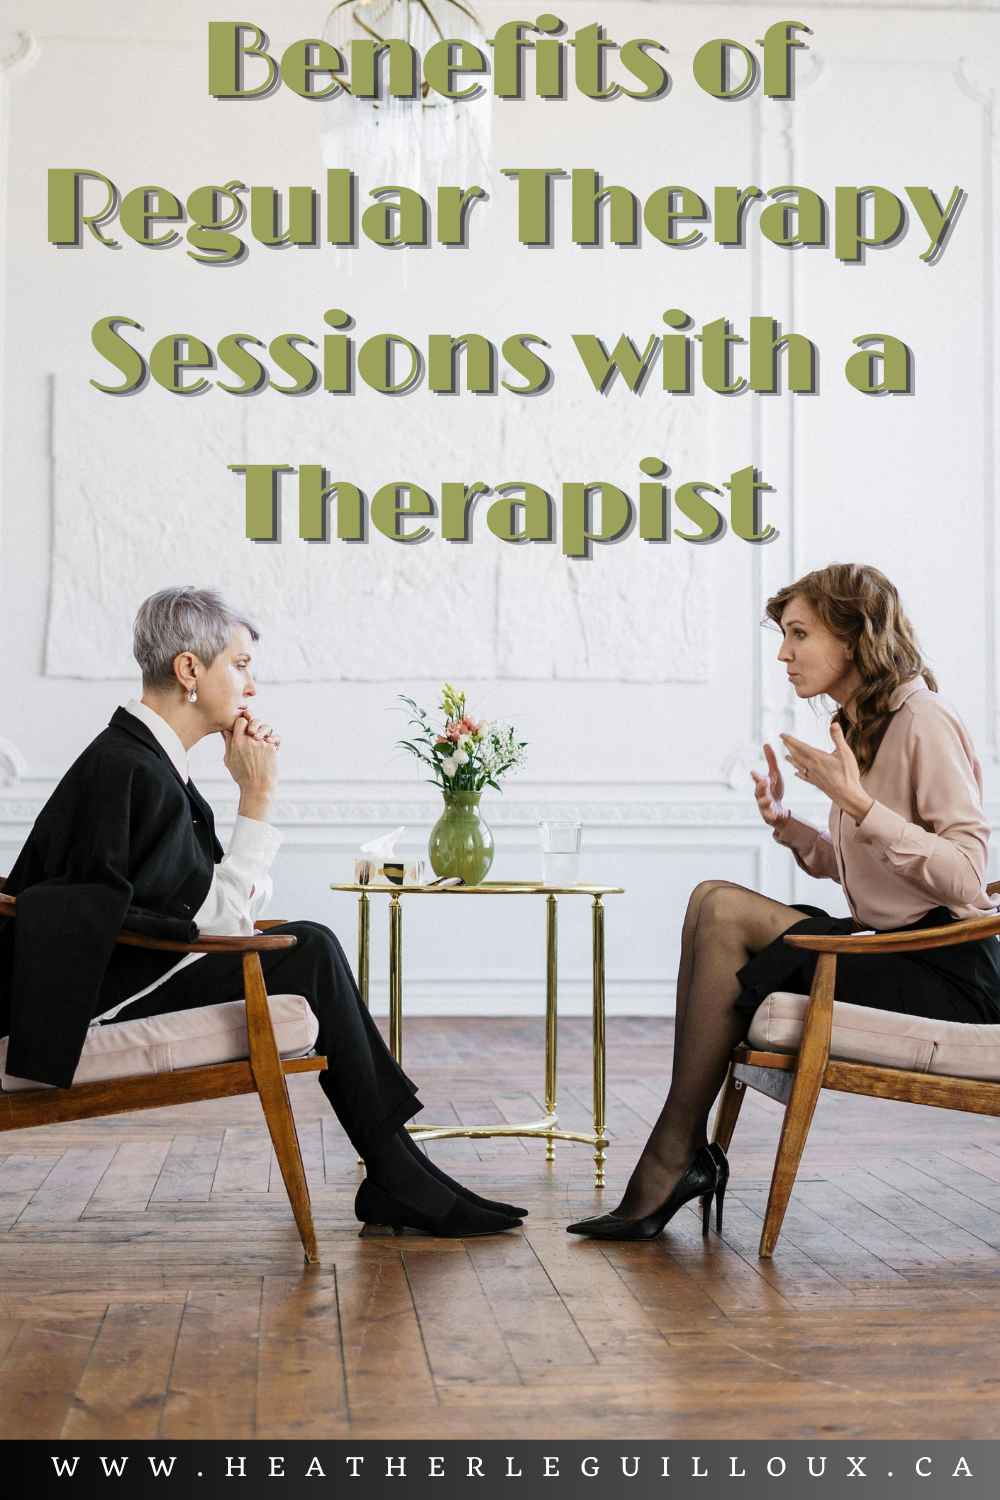 Feeling overwhelmed with life? Struggling to cope with stress? These are common issues, and many people find solace and solutions by attending therapy sessions with a therapist. Let me share a story that highlights the profound impact a therapist can have. #therapist #mentalhealth #therapy